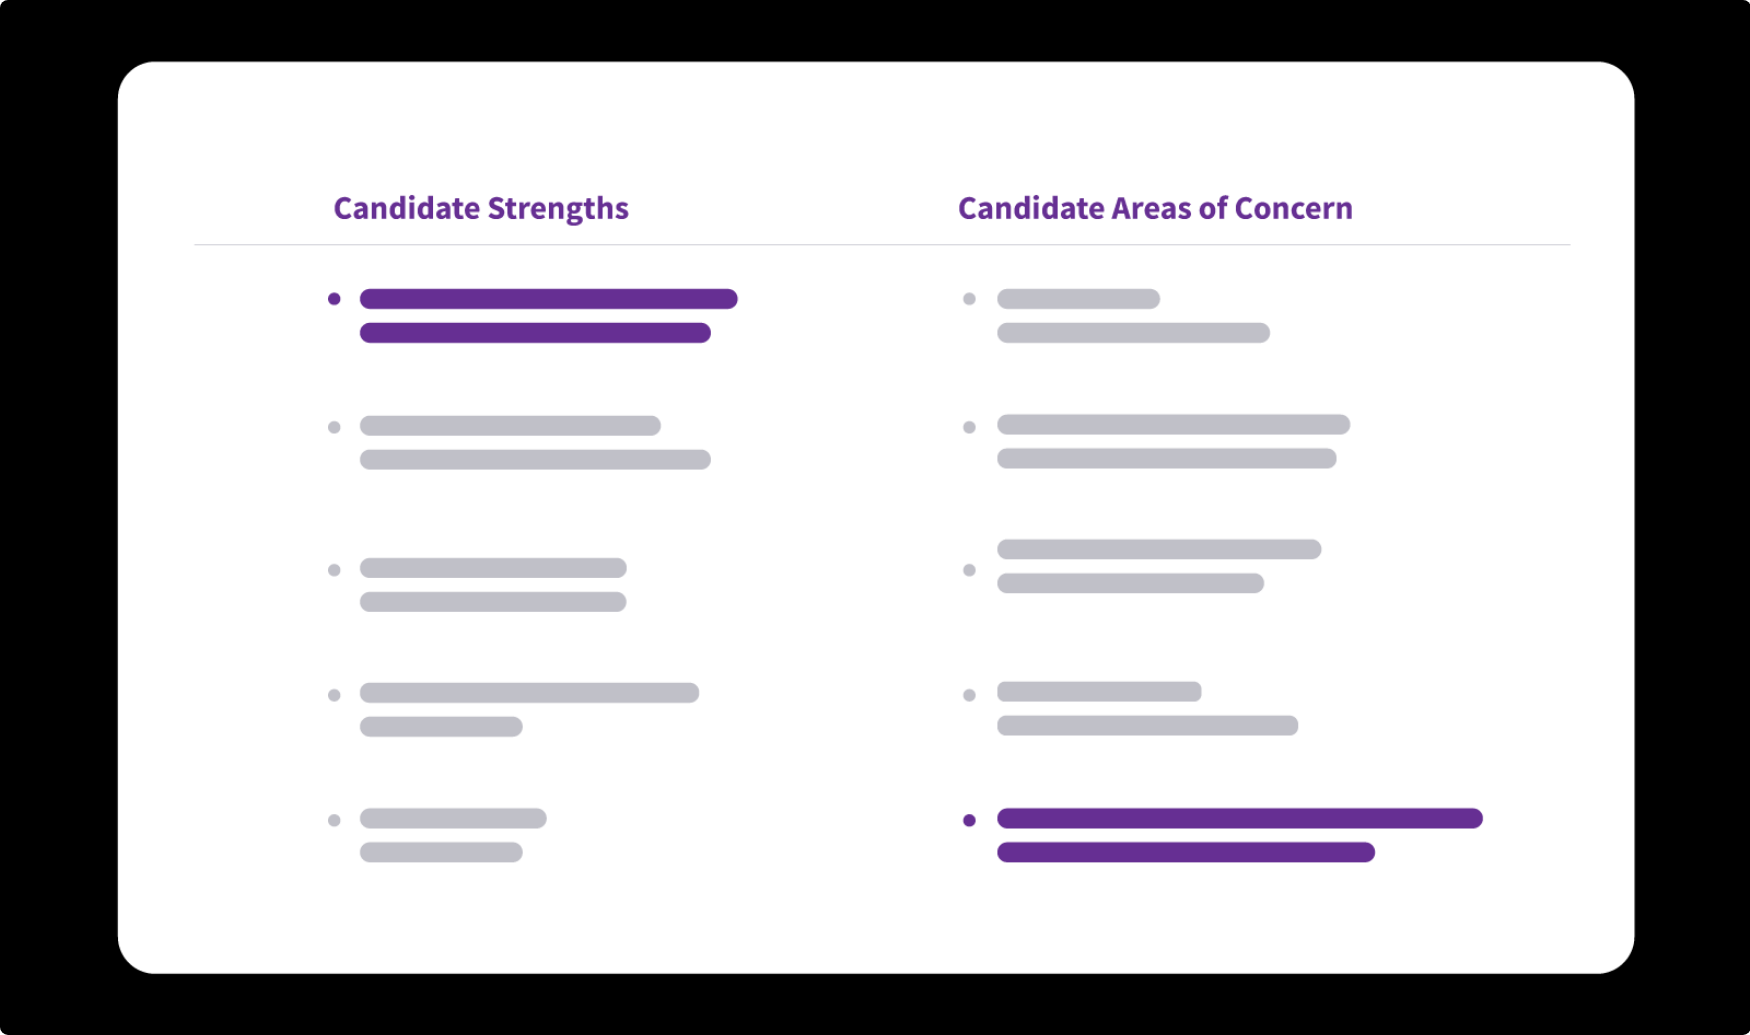 Candidate Strengths